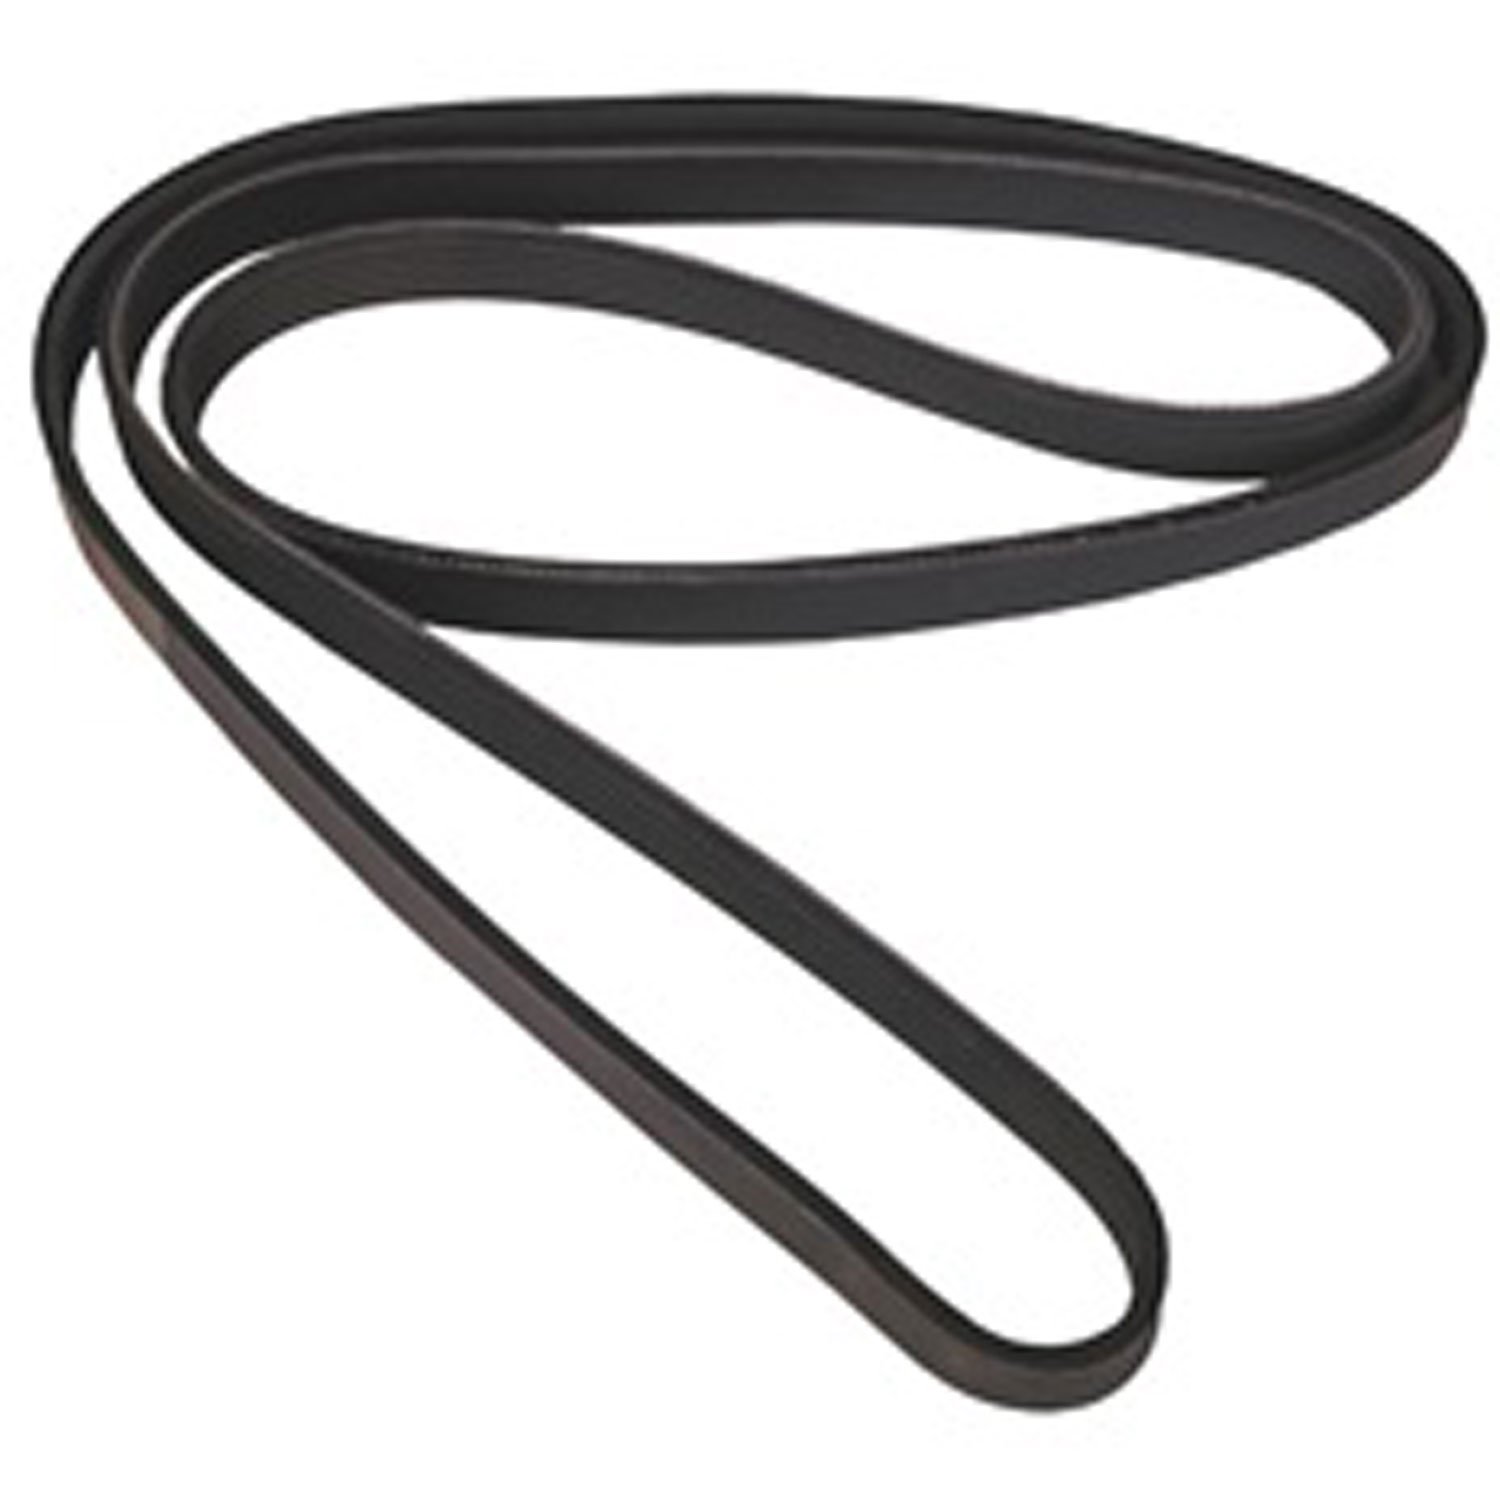 Stock replacement serpentine belt from Omix-ADA, Fits 04-06 Jeep Grand Cherokees and 05-06 Jeep Libertys.